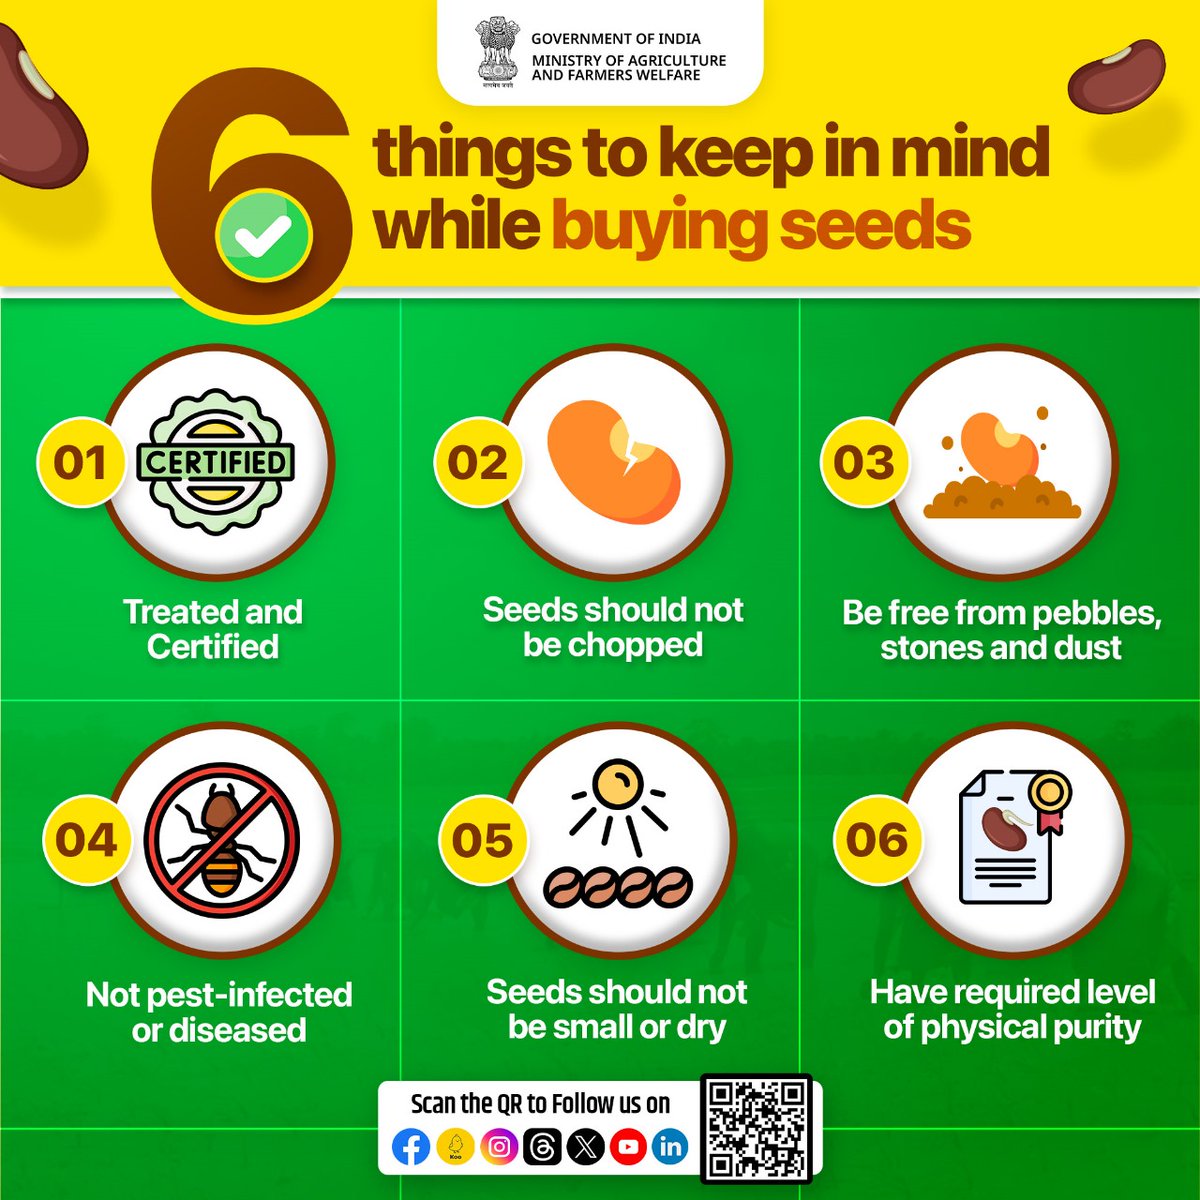 Healthy #Seeds are Key to Healthy #Crops!

Here are 6 things #farmers need to keep in mind while buying seeds as good quality & healthy seeds leads to healthy produce & thriving yields.

#agrigoi #seedsforthefuture #seedsofchange #ItAllStartsWithTheSeeds